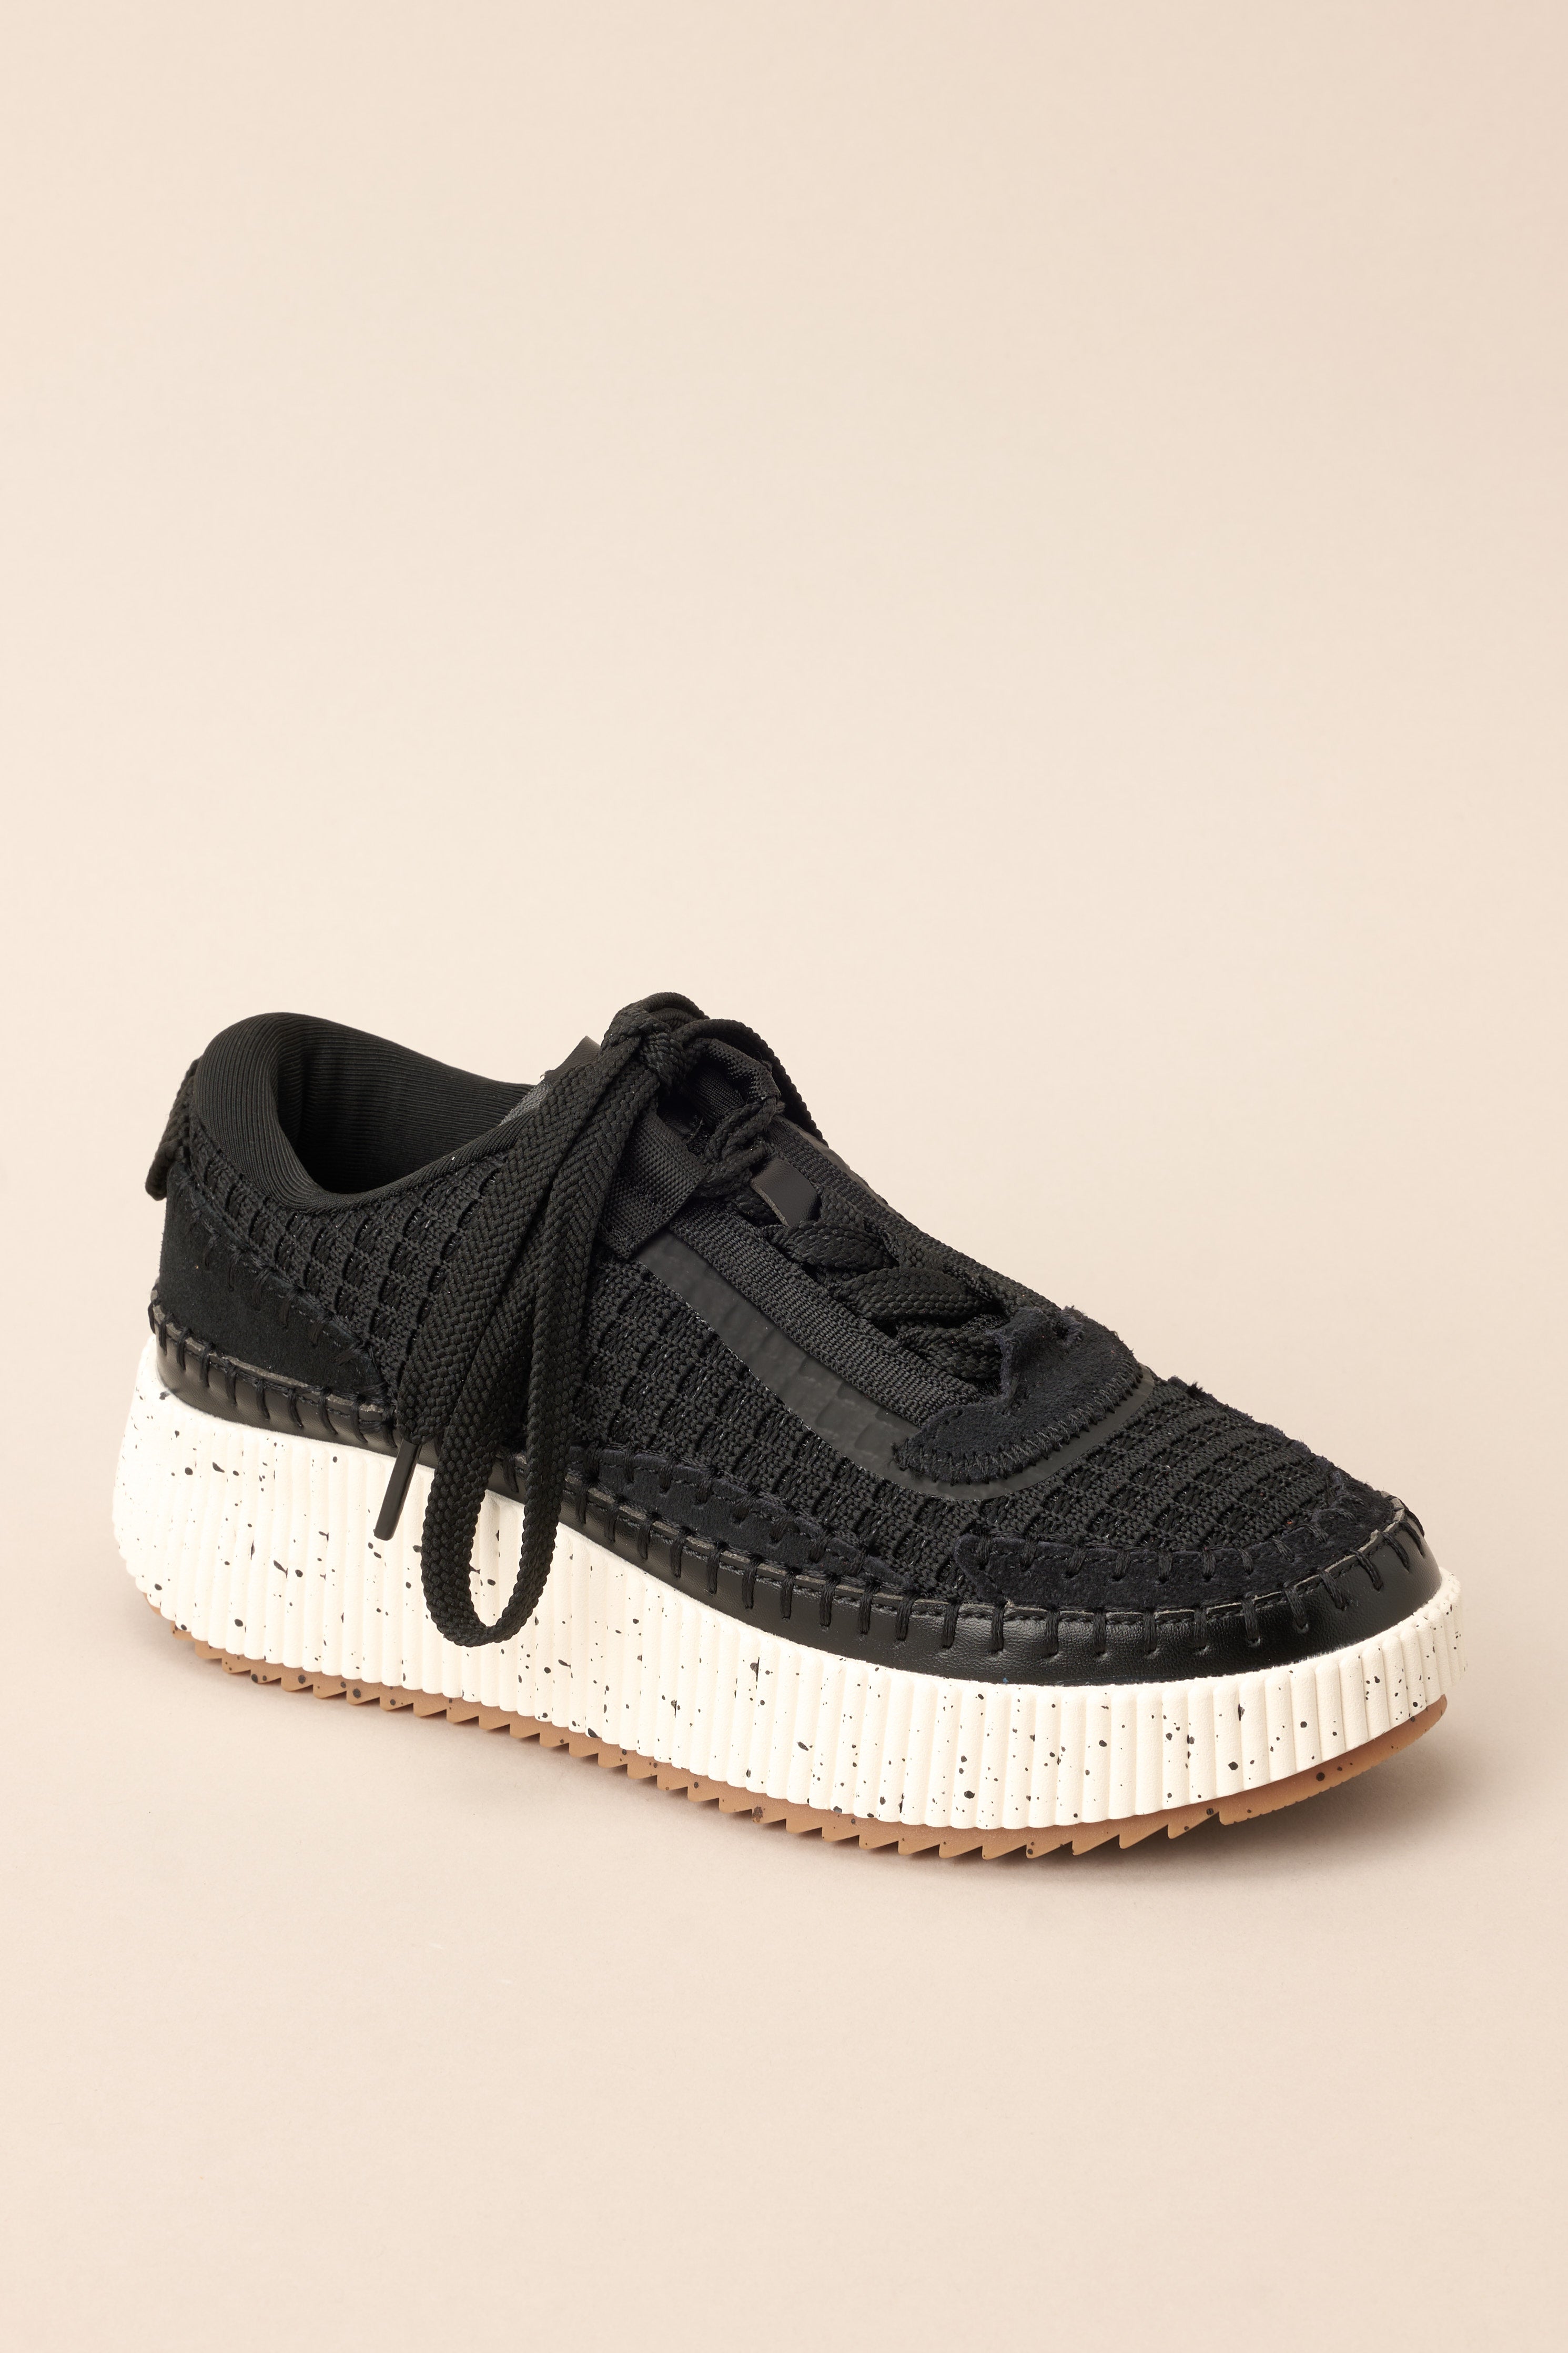 Angled outer-side view of these sneakers that feature a rounded toe, functional laces, knitted detailing throughout, a comfortable fit, and a thick sole.